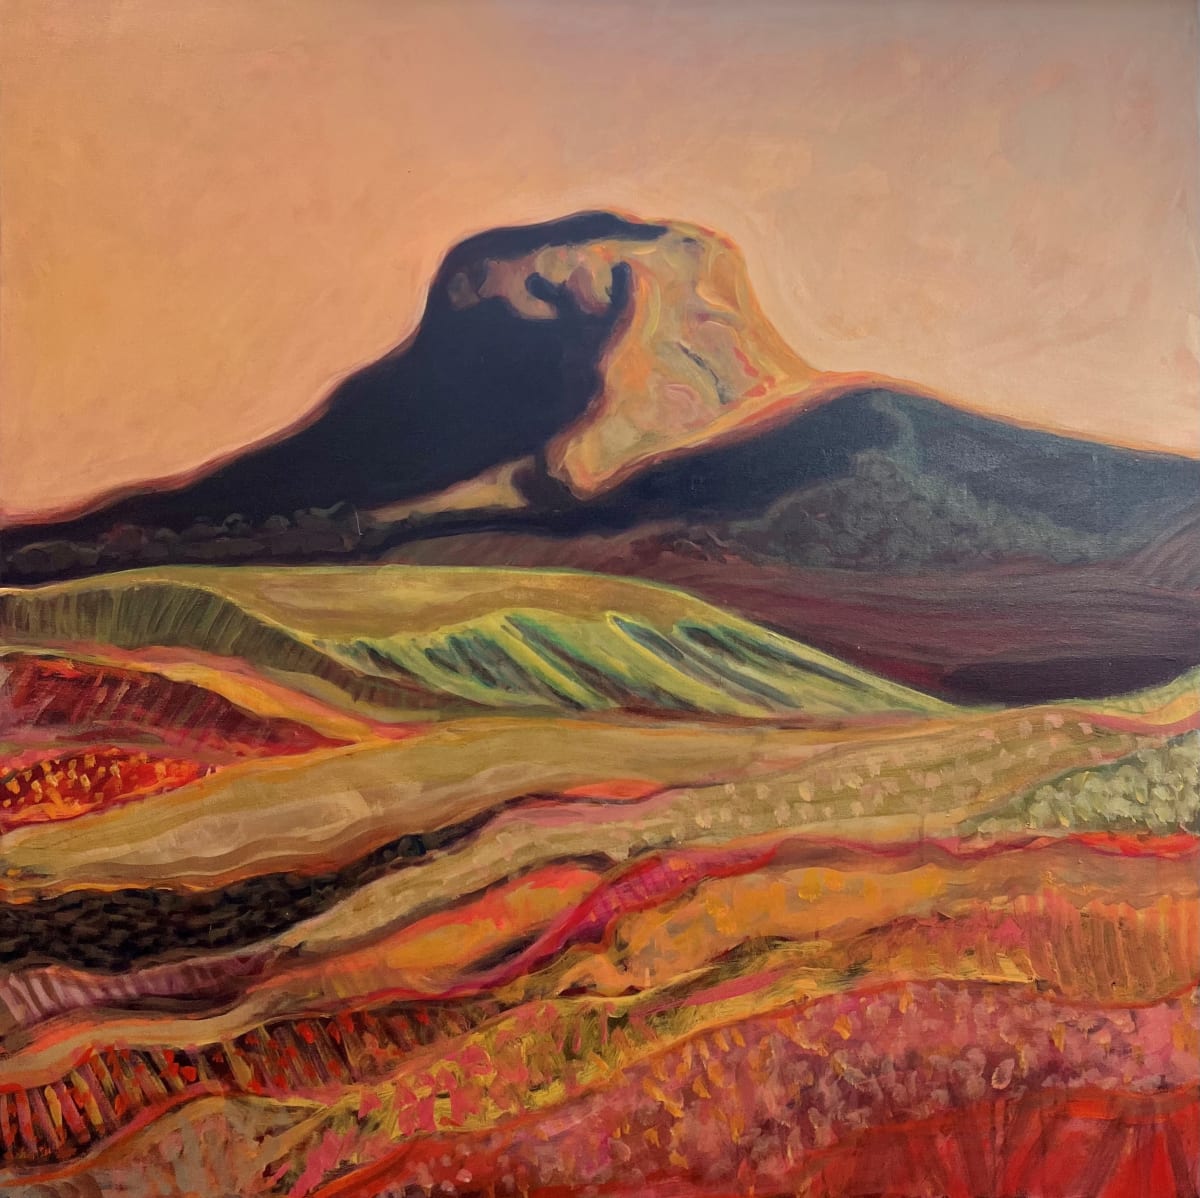 Mount Misery by Kim Harding  Image: "Mount Misery" Oil on Canvas 101 x 101cm